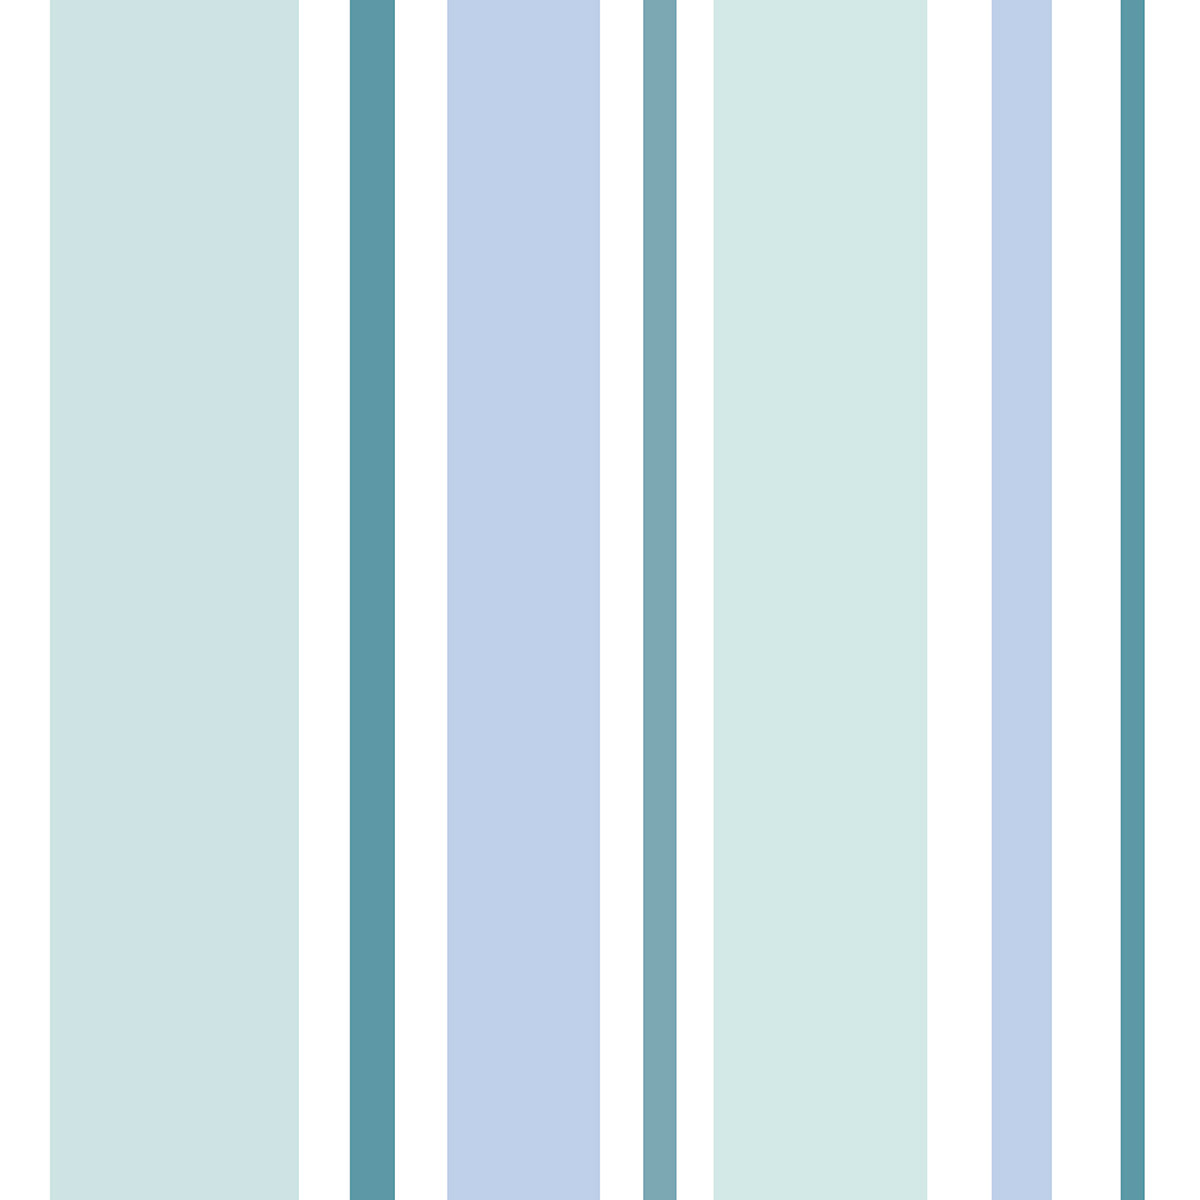 A close-up of a blue and white striped wallpaper